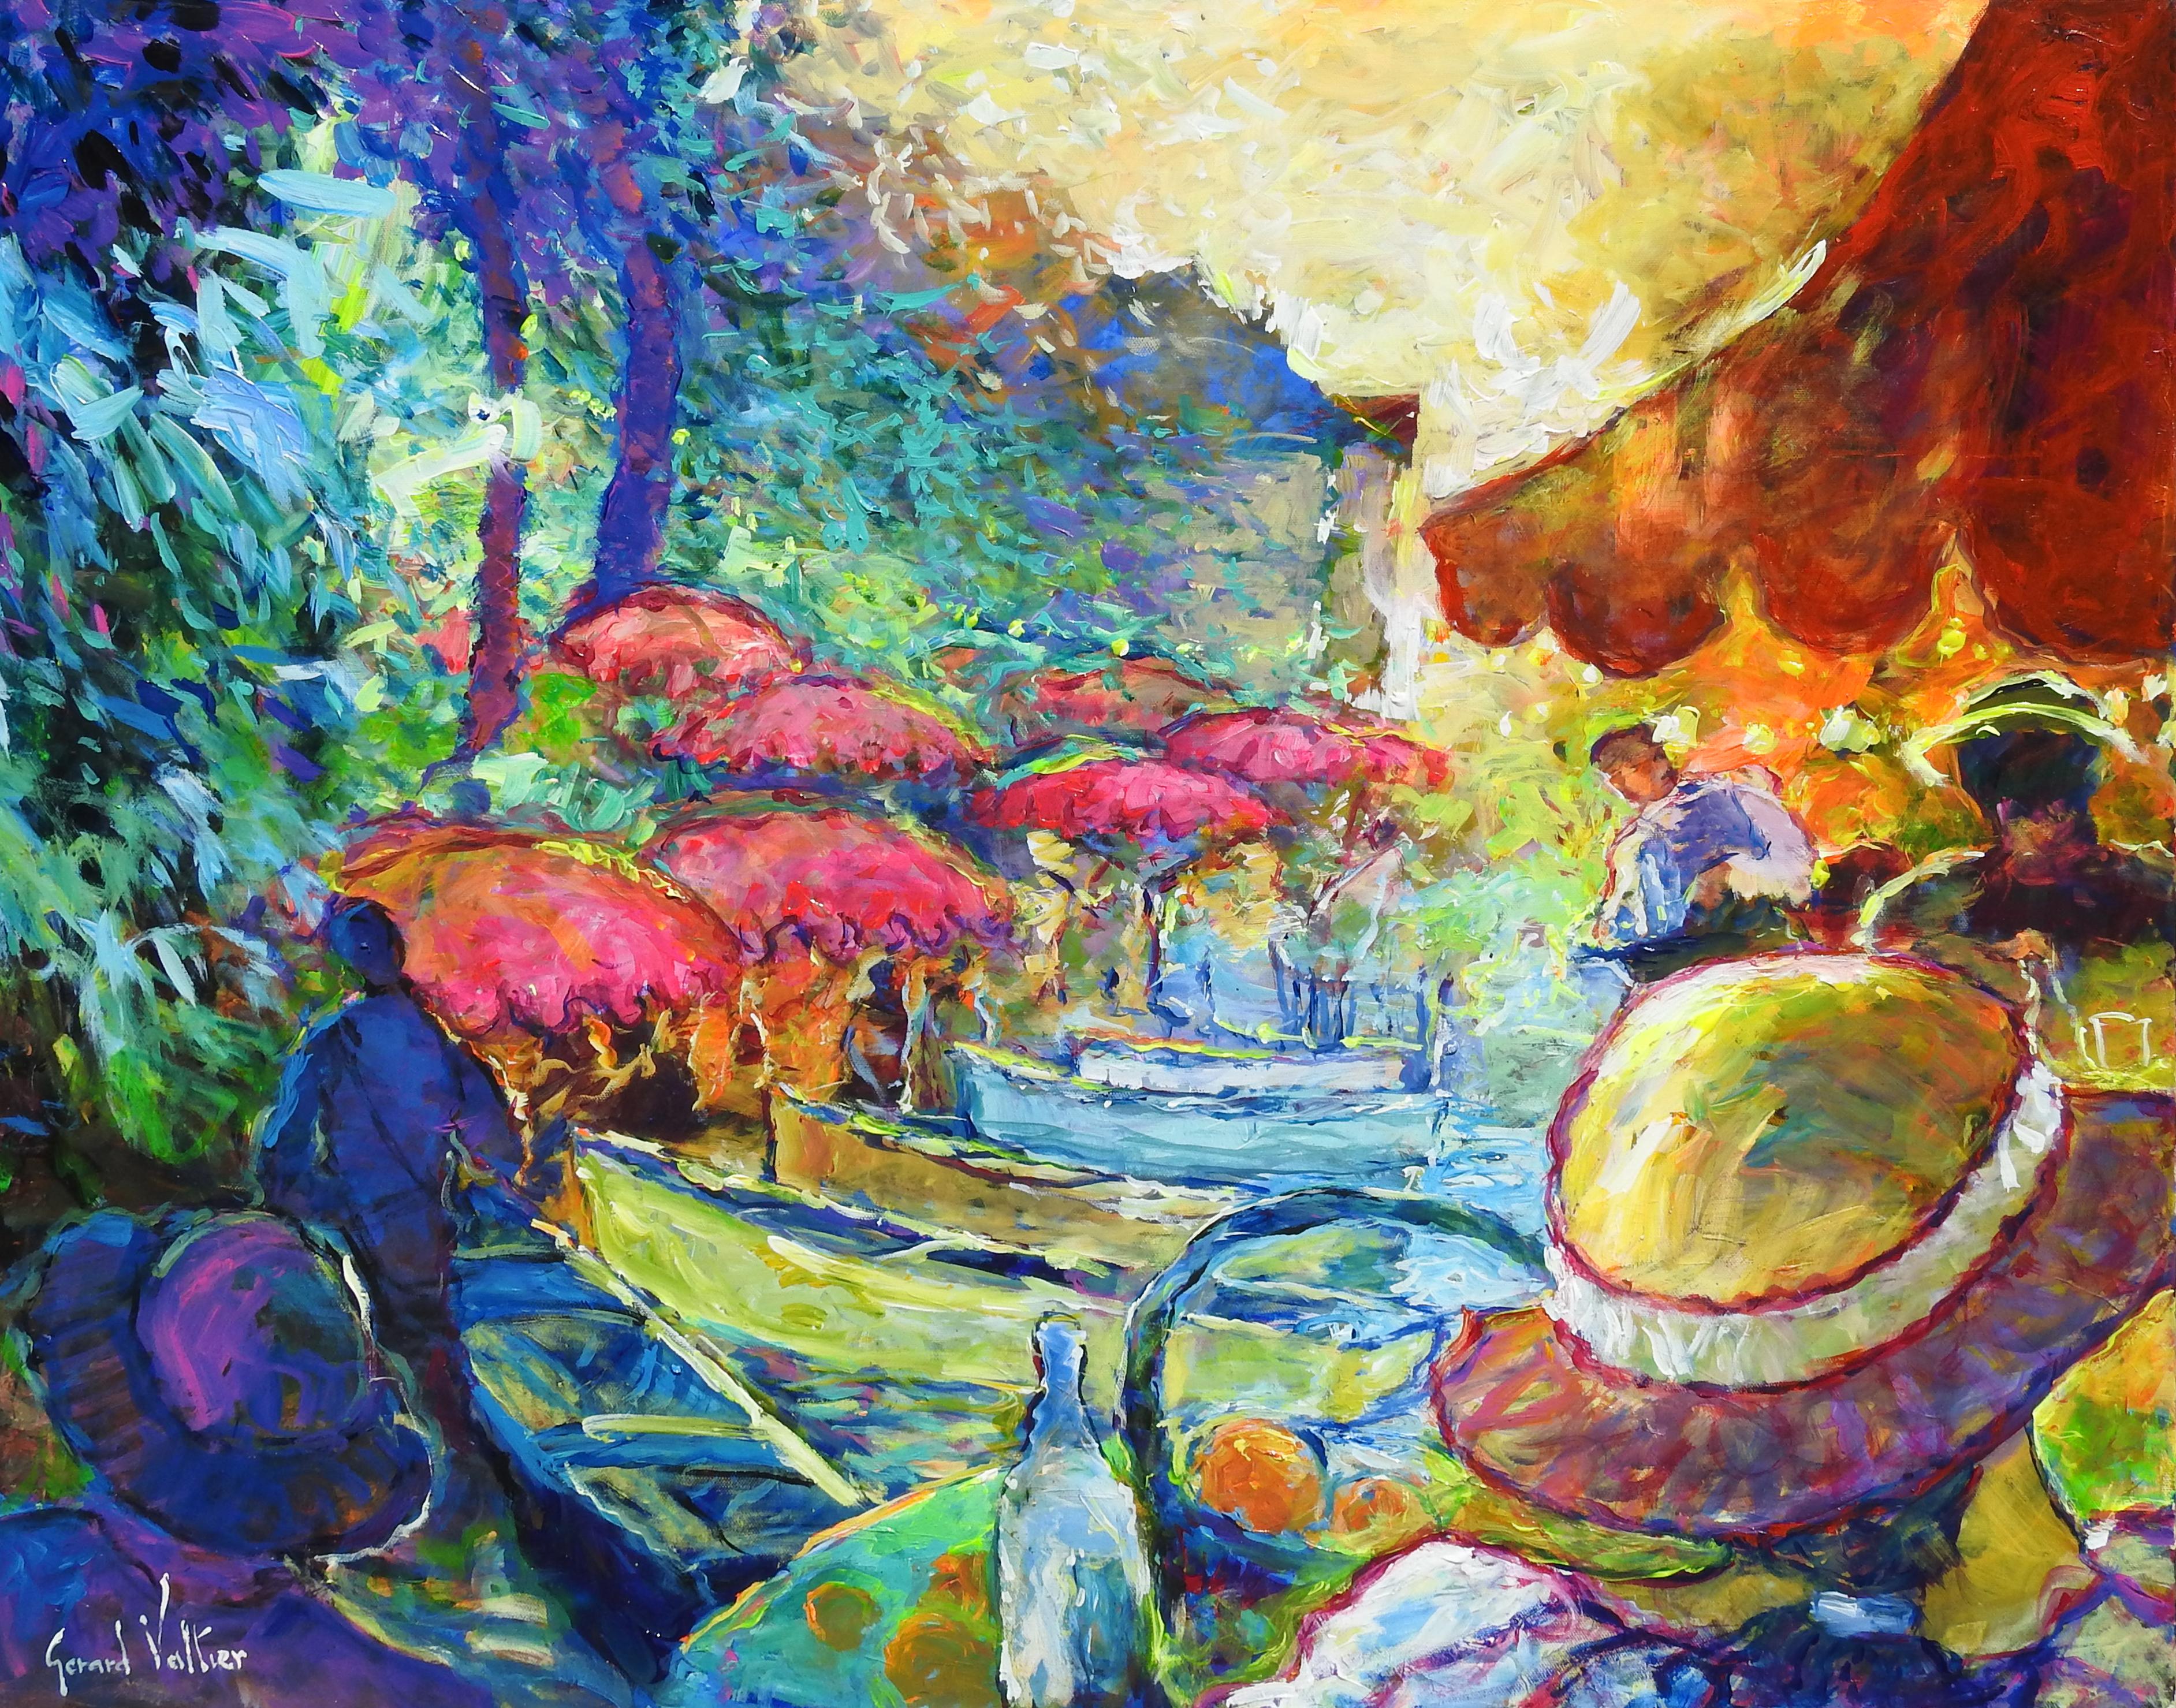 "Parasols Au Ciel D'Or" by Gerard Valtier is an original oil on canvas that measures 29x36 inches. This impressionistic painting has an array of bright colors to create a fun and musical image. As people gather at the lake pink umbrellas are given